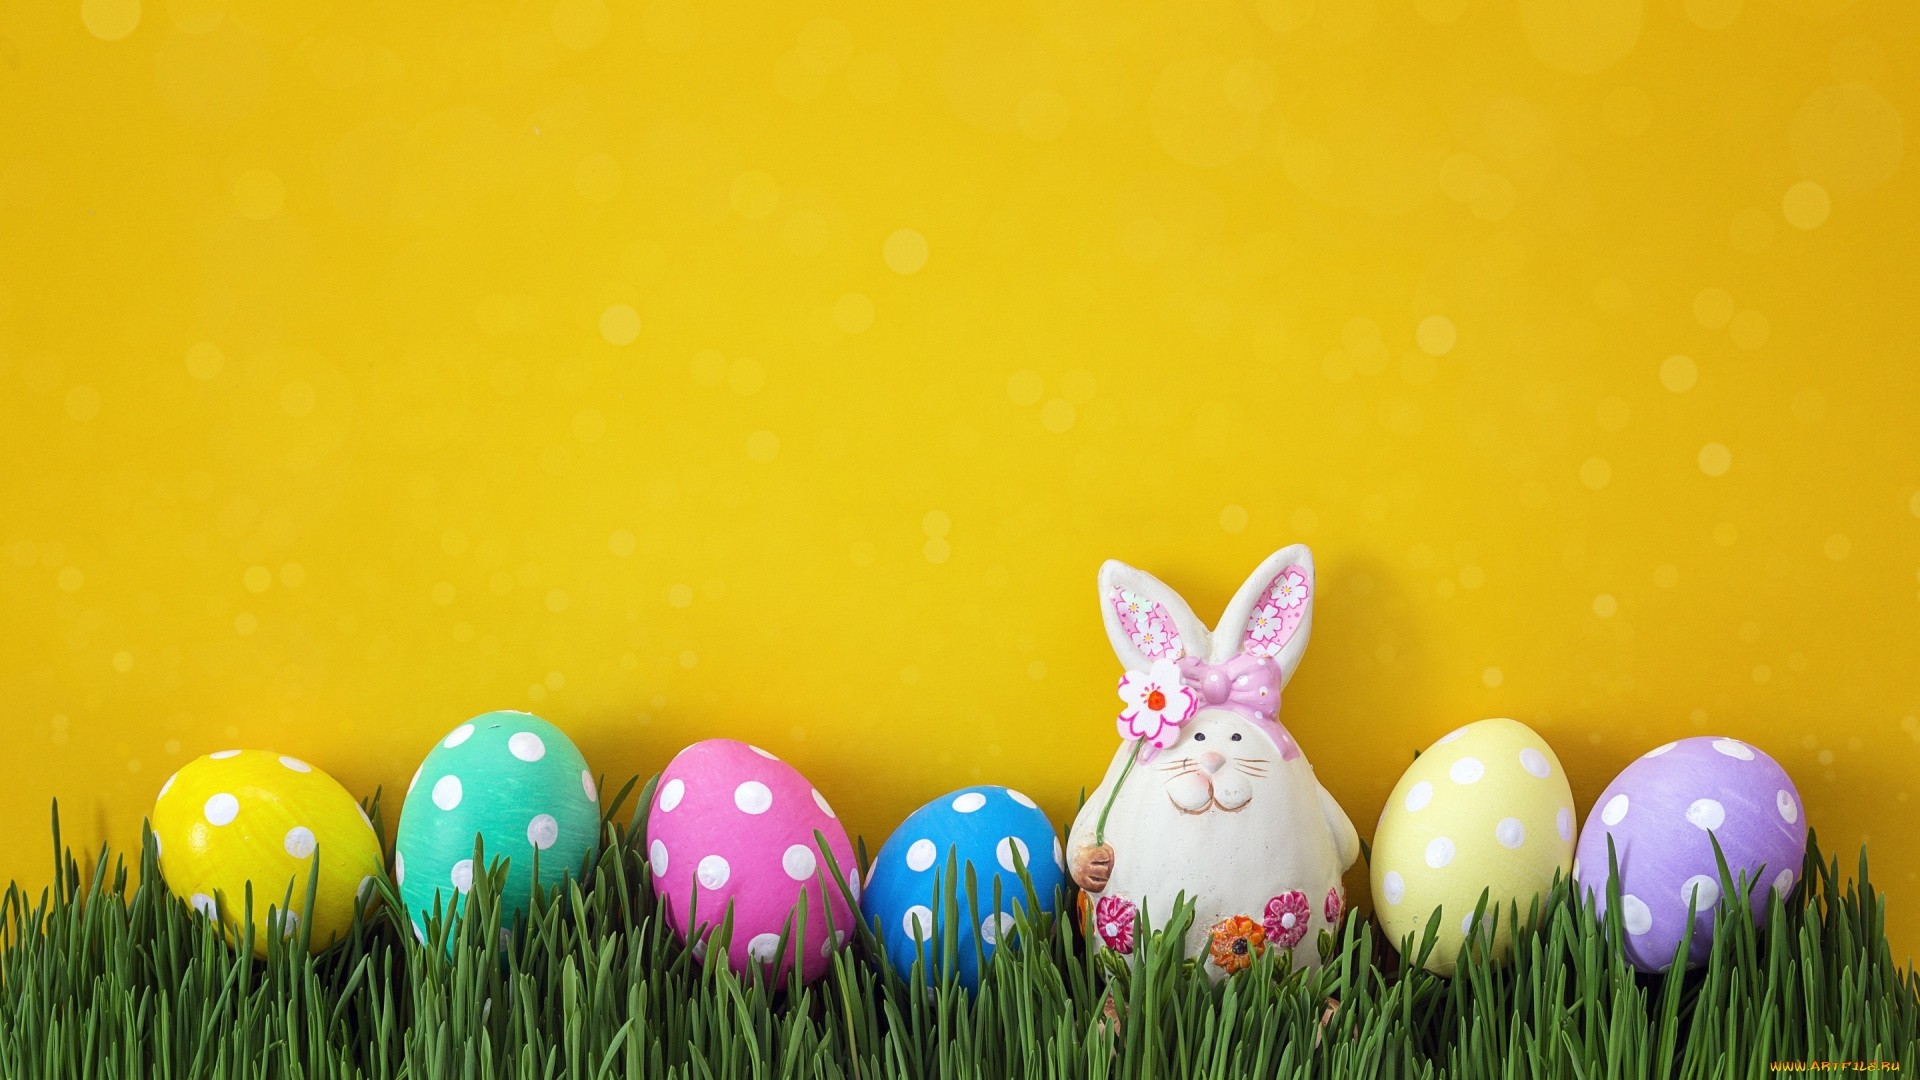 Happy Easter Image Download